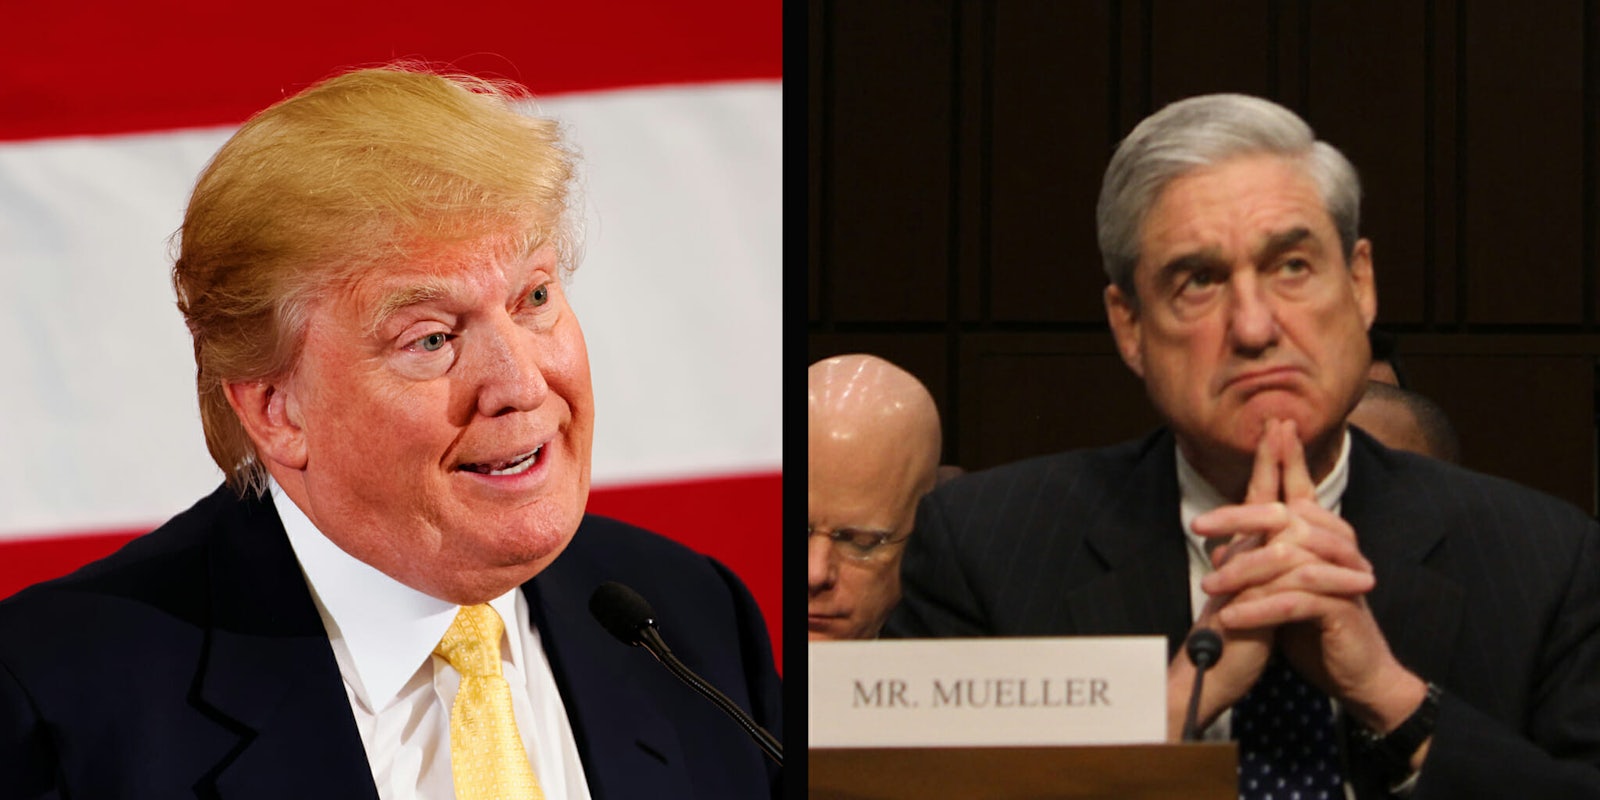 Special Counsel Robert Mueller has reportedly subpoenaed Deutsche Bank to hand over business records related to President Donald Trump.